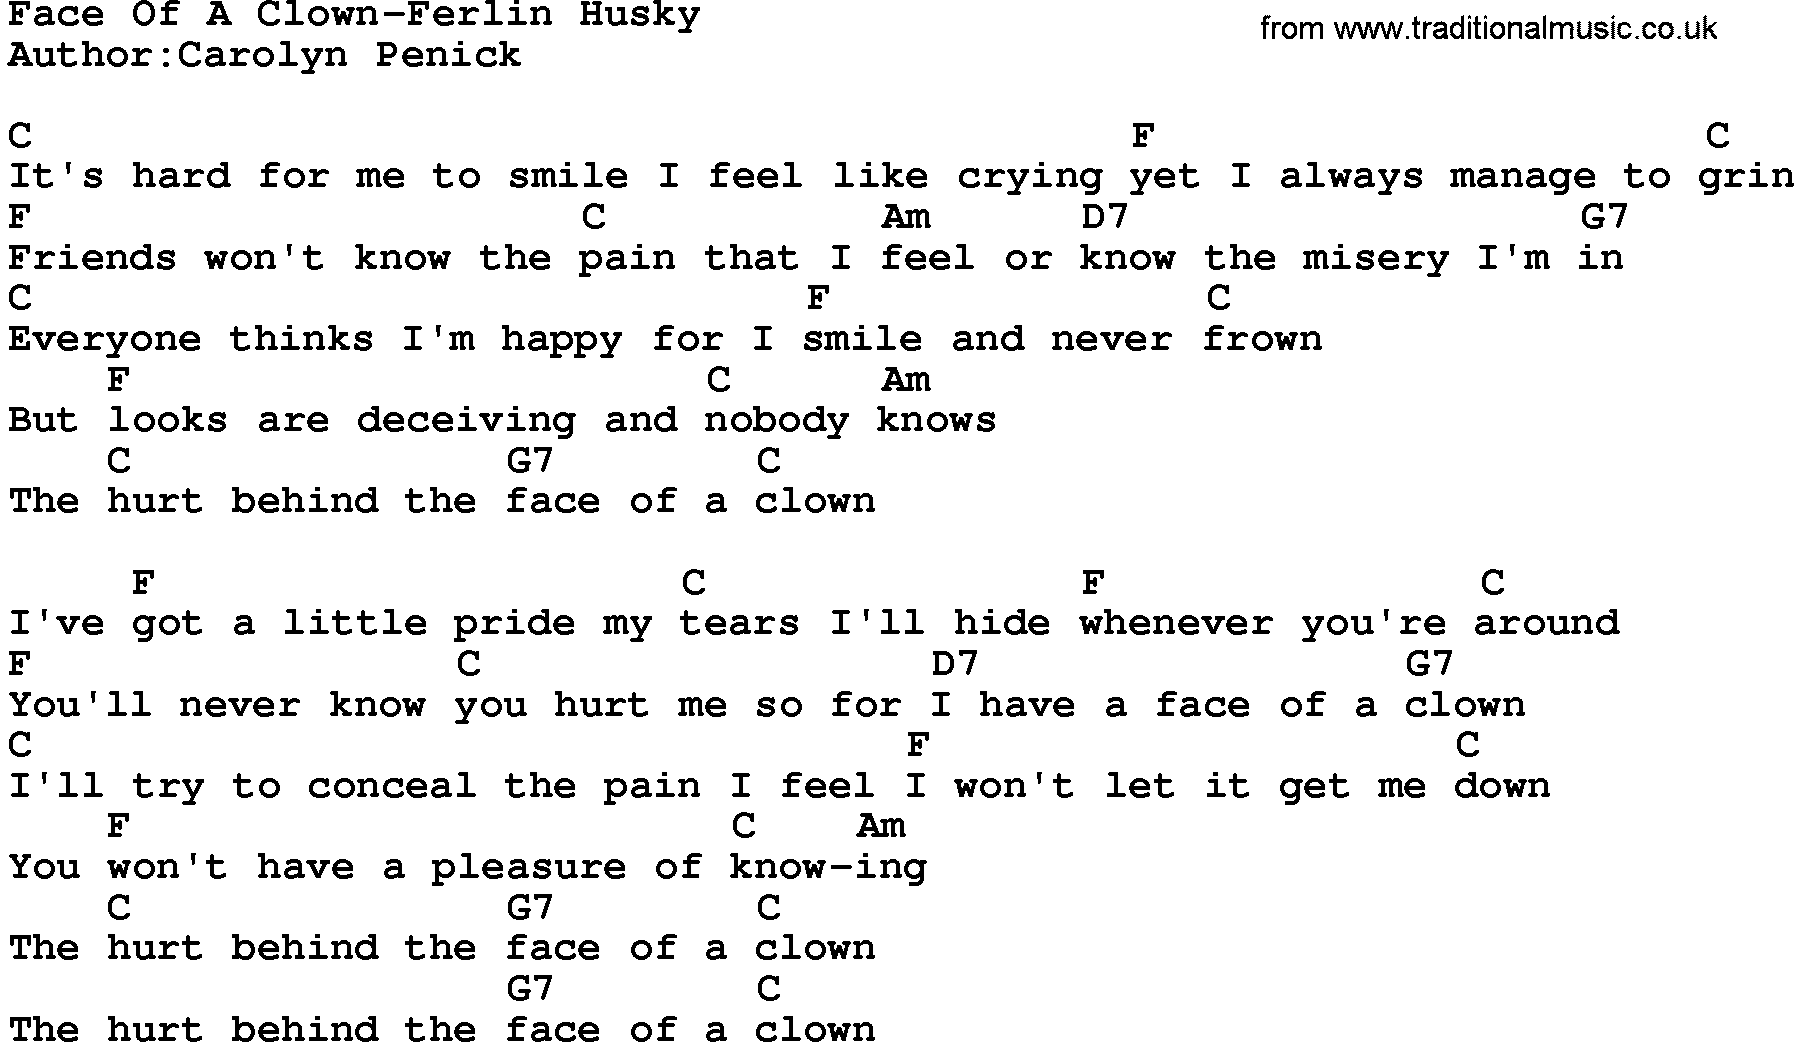 Country music song: Face Of A Clown-Ferlin Husky lyrics and chords